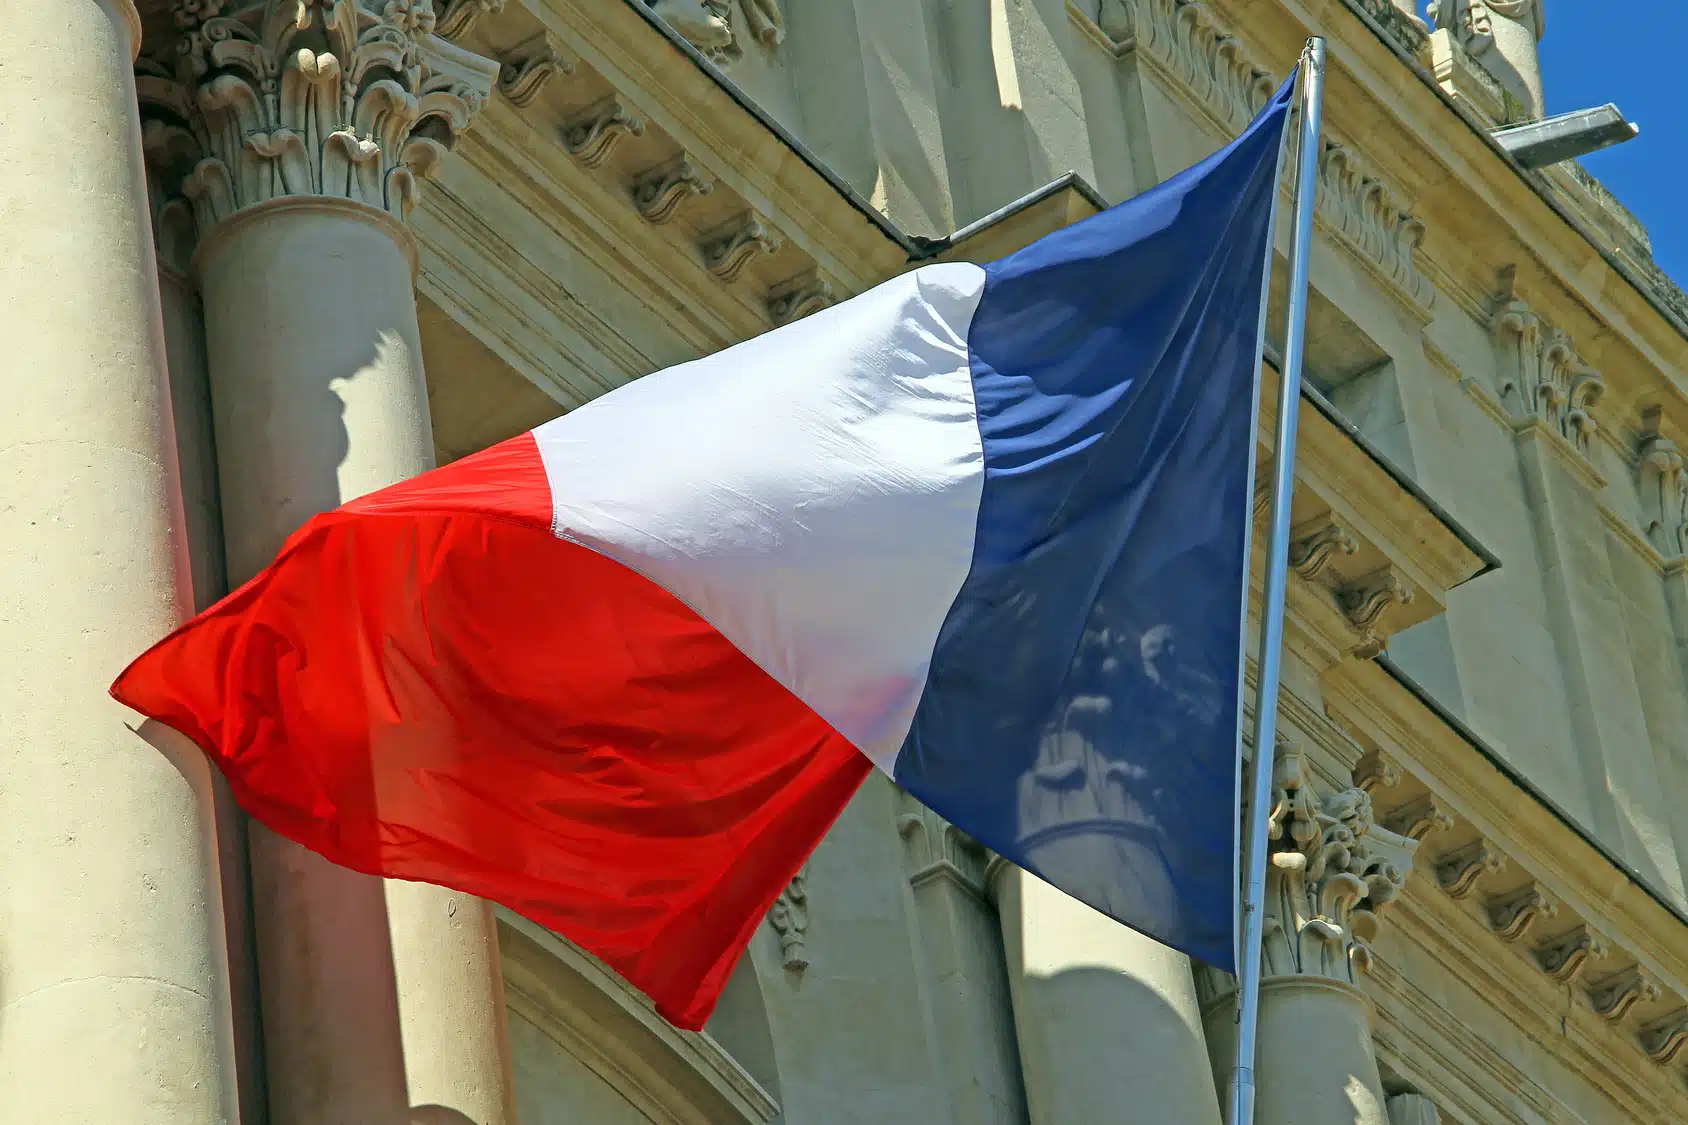 Investors Are Becoming More Interested in France as Concerns About Germany Continue to Increase